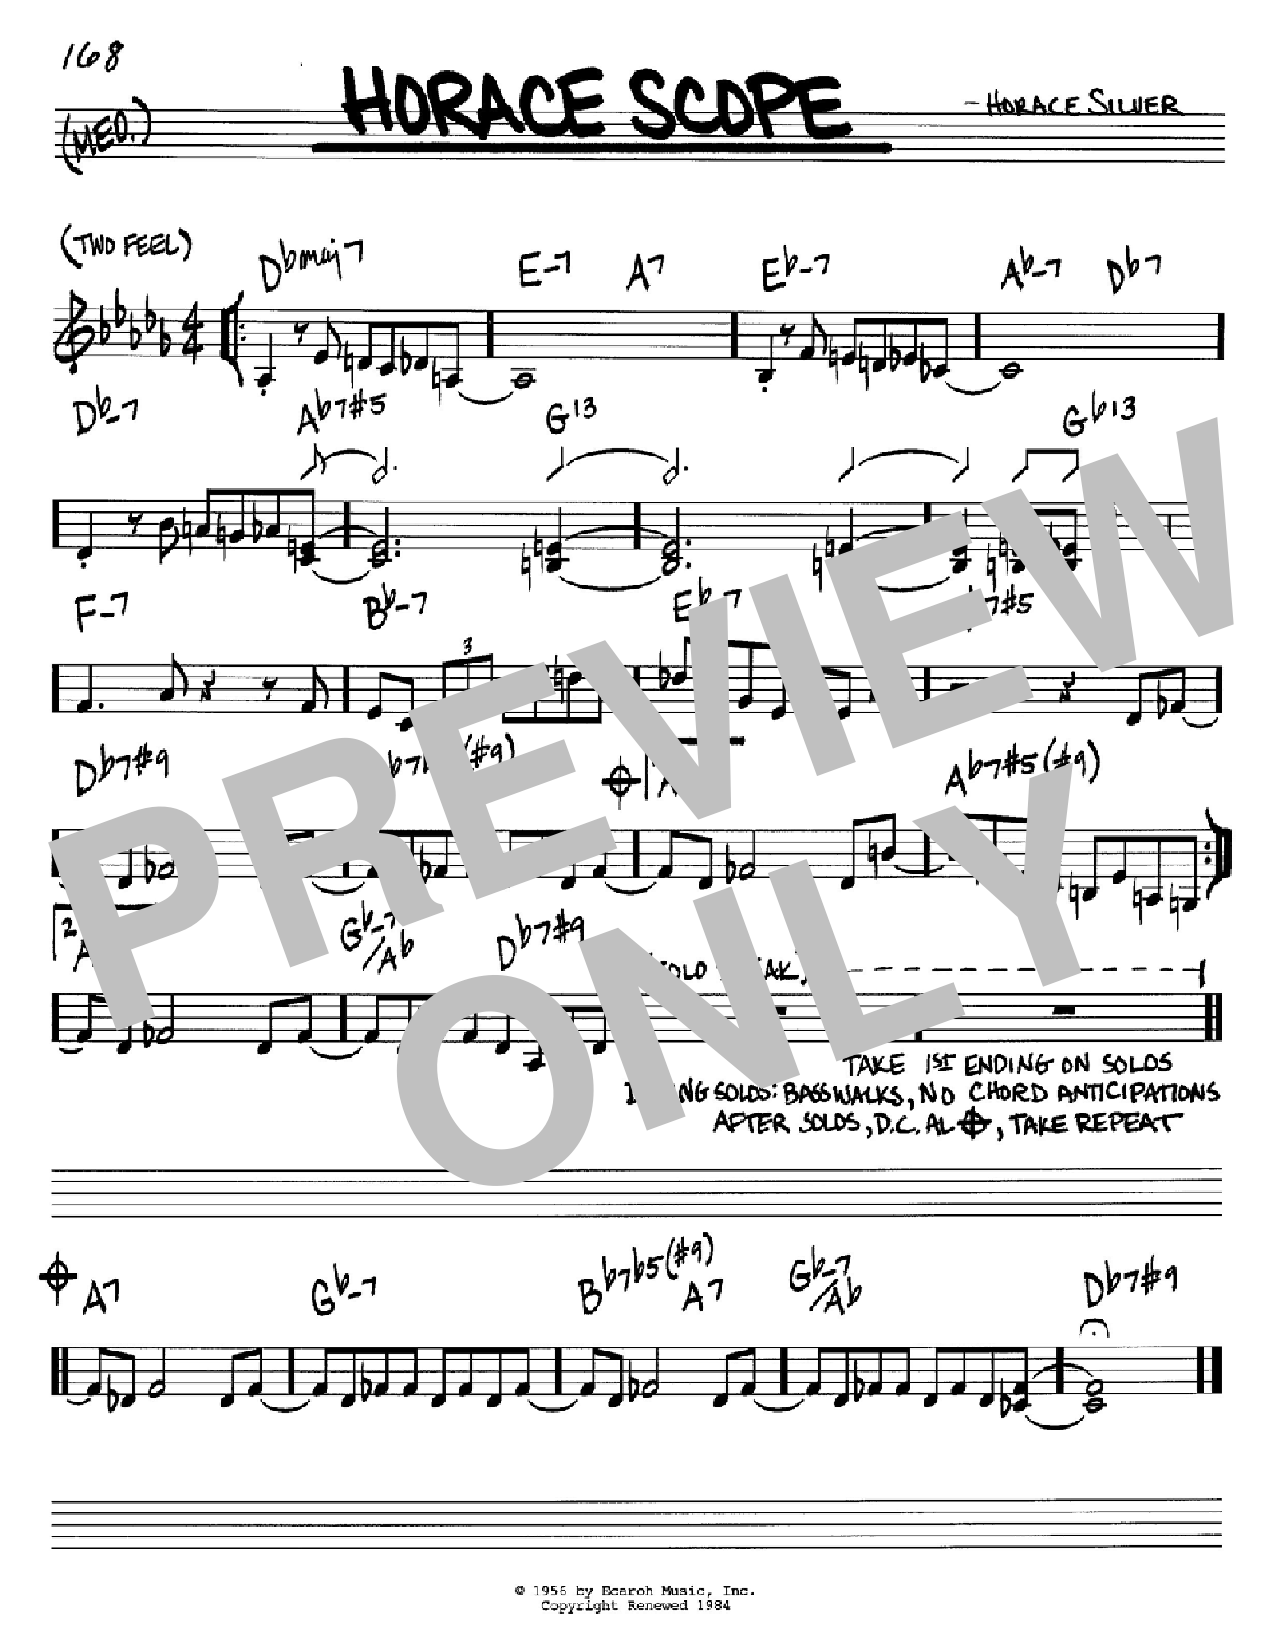 Download Horace Silver Horace Scope Sheet Music